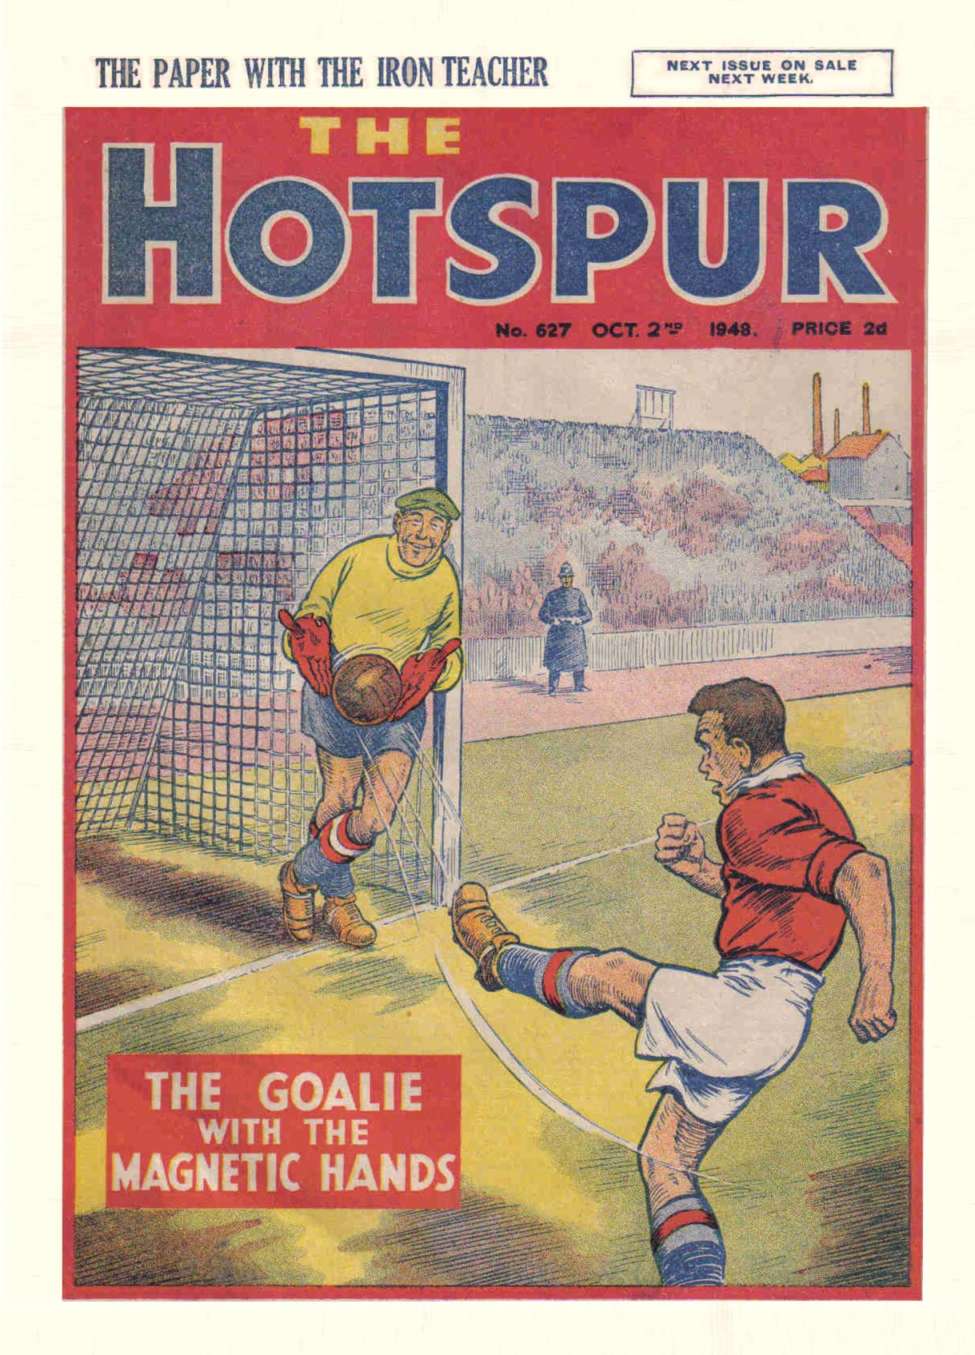 Book Cover For The Hotspur 627